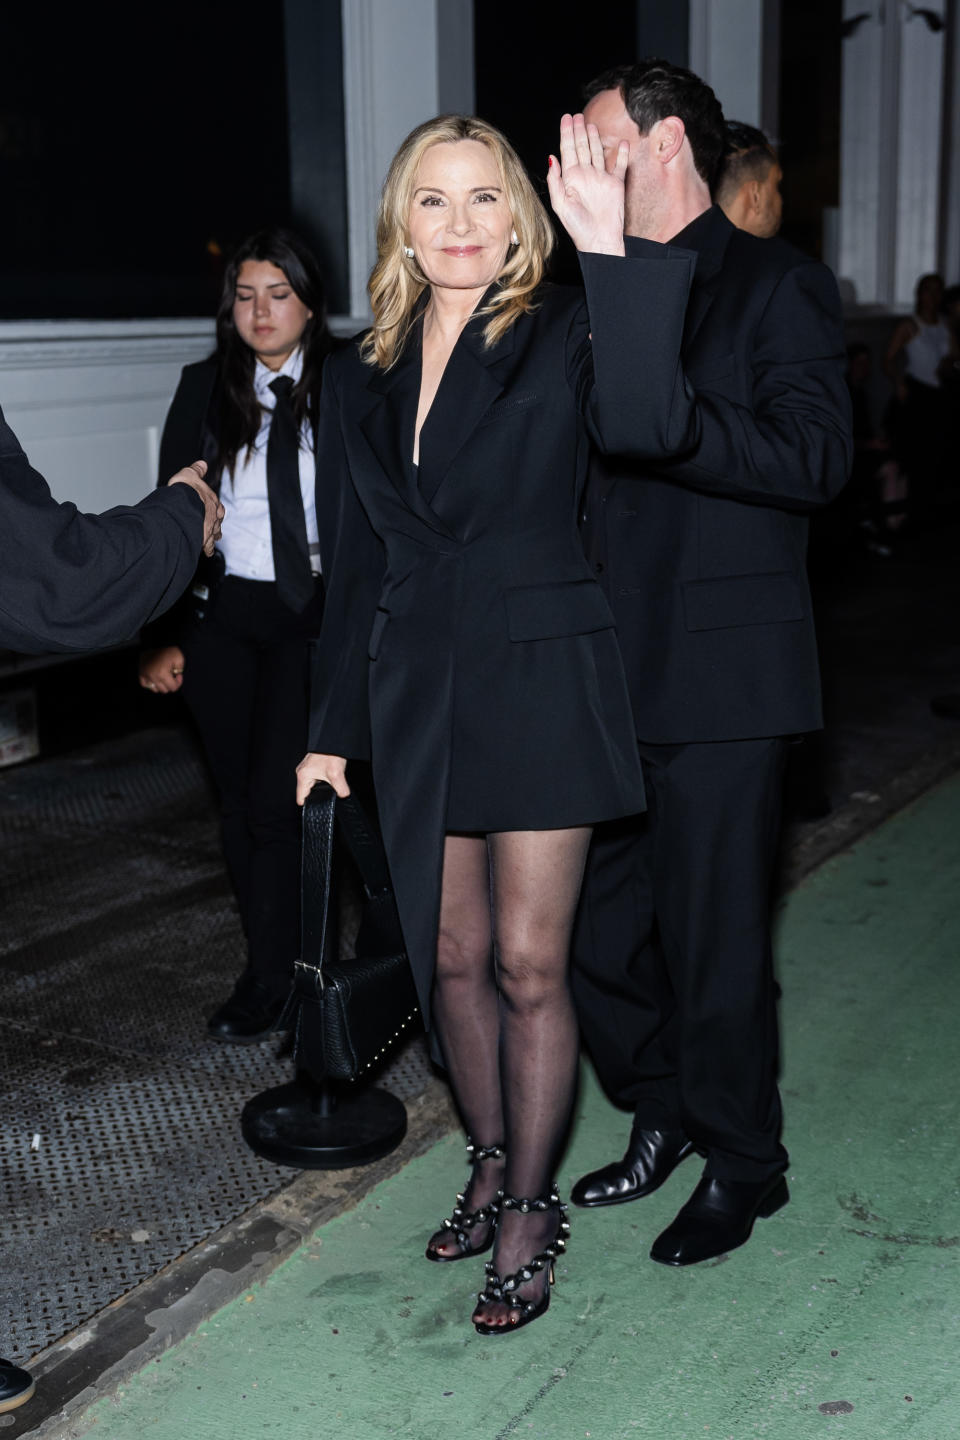 Kim Cattrall attends the Alexander Wang runway show in SoHo